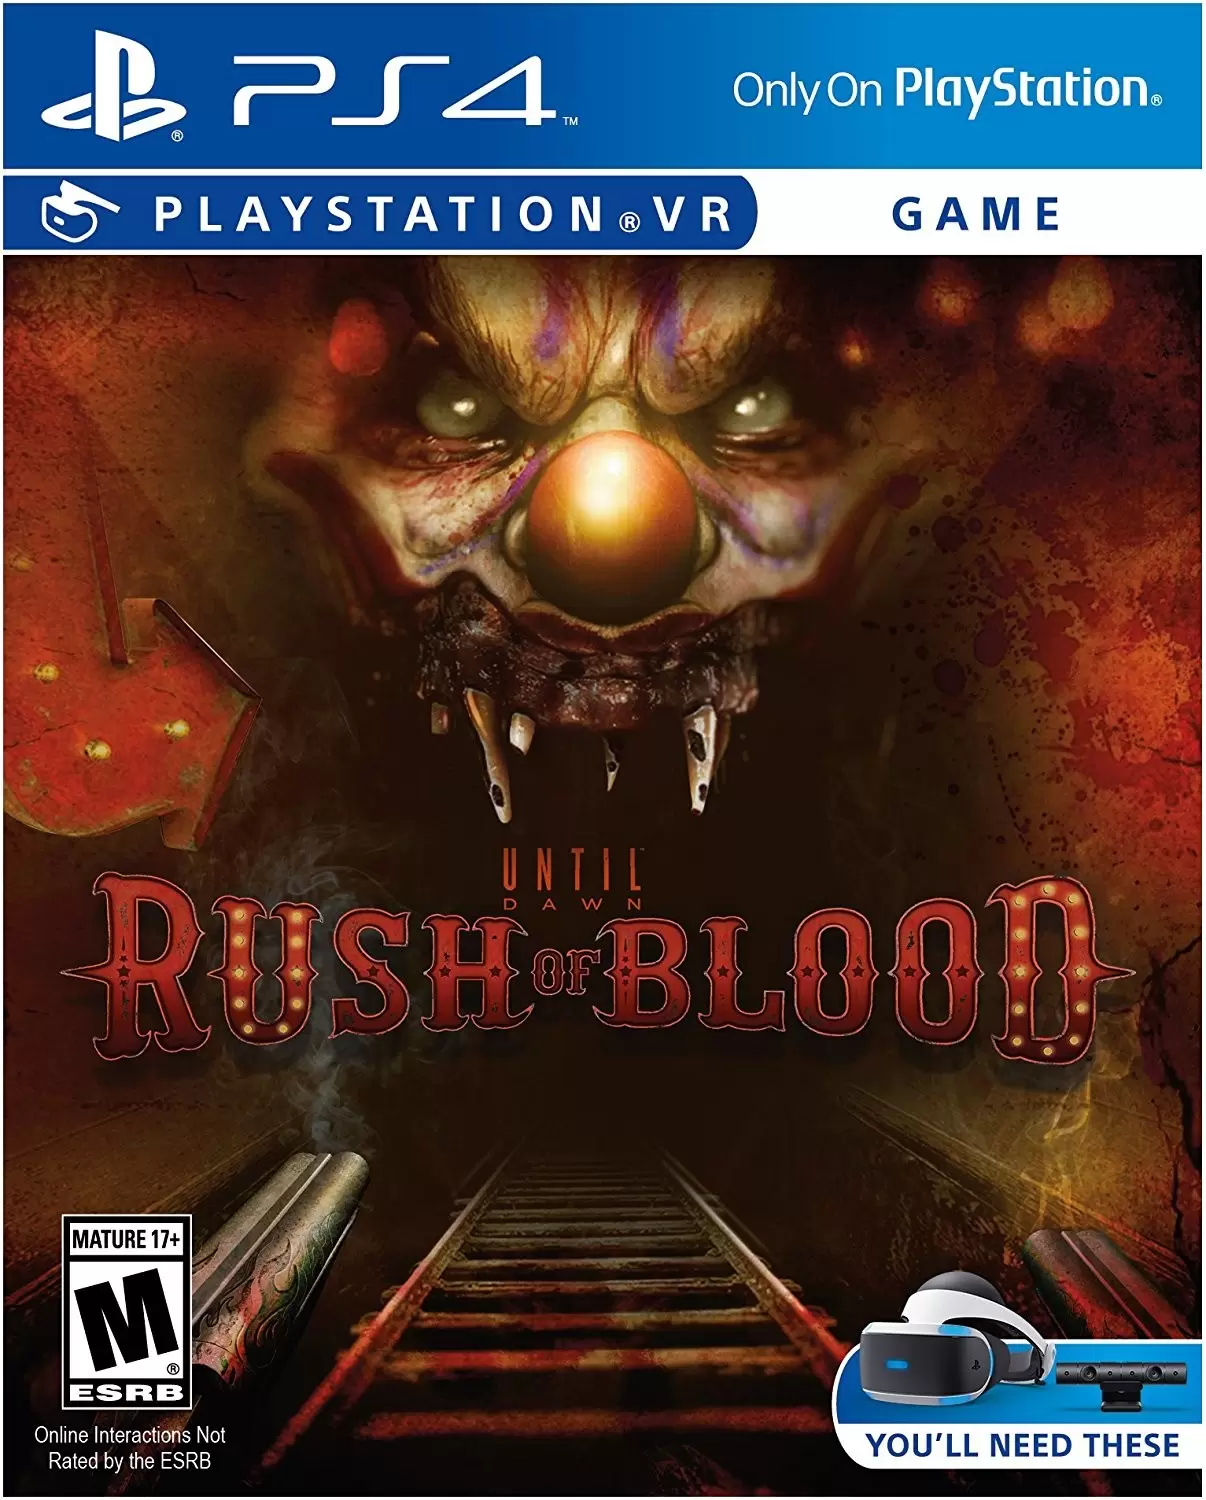 PS4 Games - Until Dawn: Rush of Blood